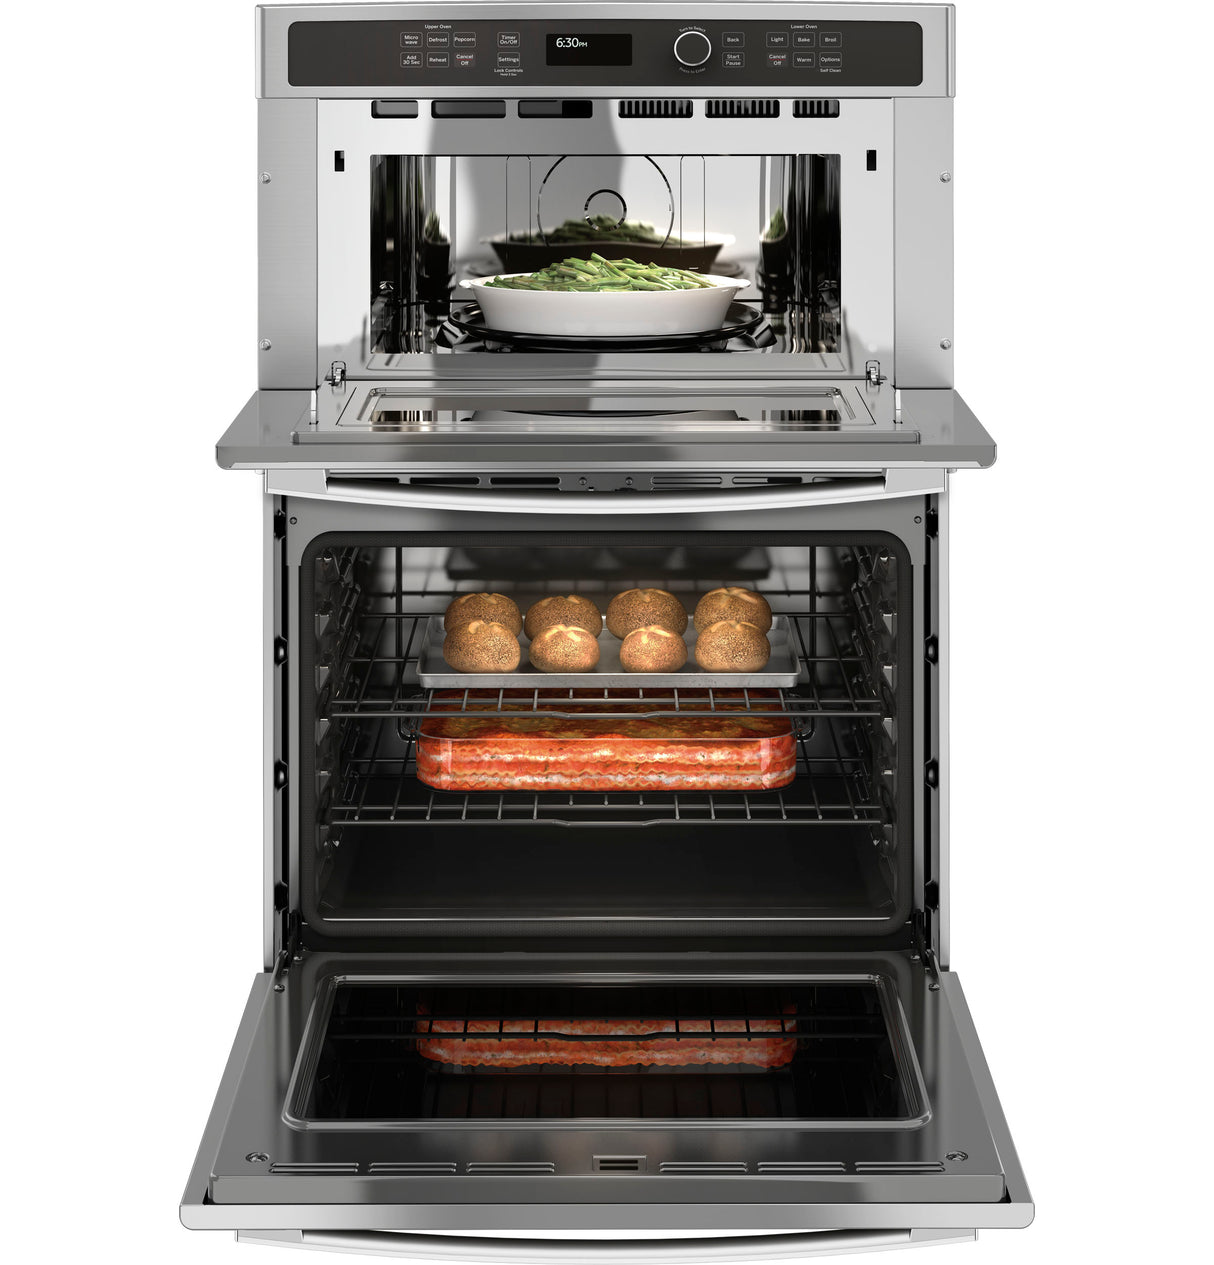 GE(R) 30" Combination Double Wall Oven - (JT3800SHSS)